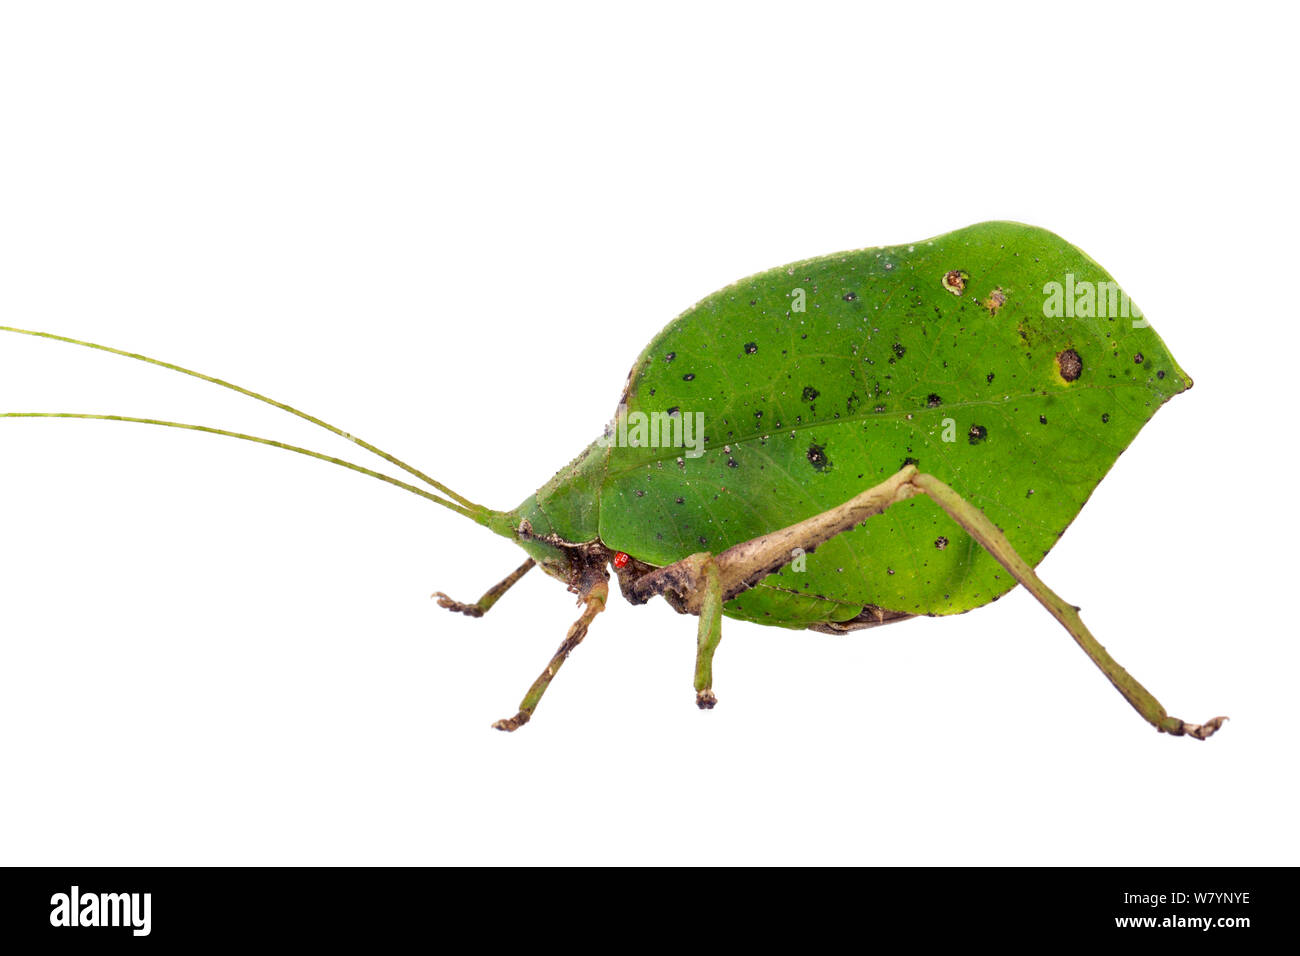 True leaf katydid (Mimetica sp) with mite, Caves Branch, Cayo District, Belize, September. meetyourneighbours.net project Stock Photo